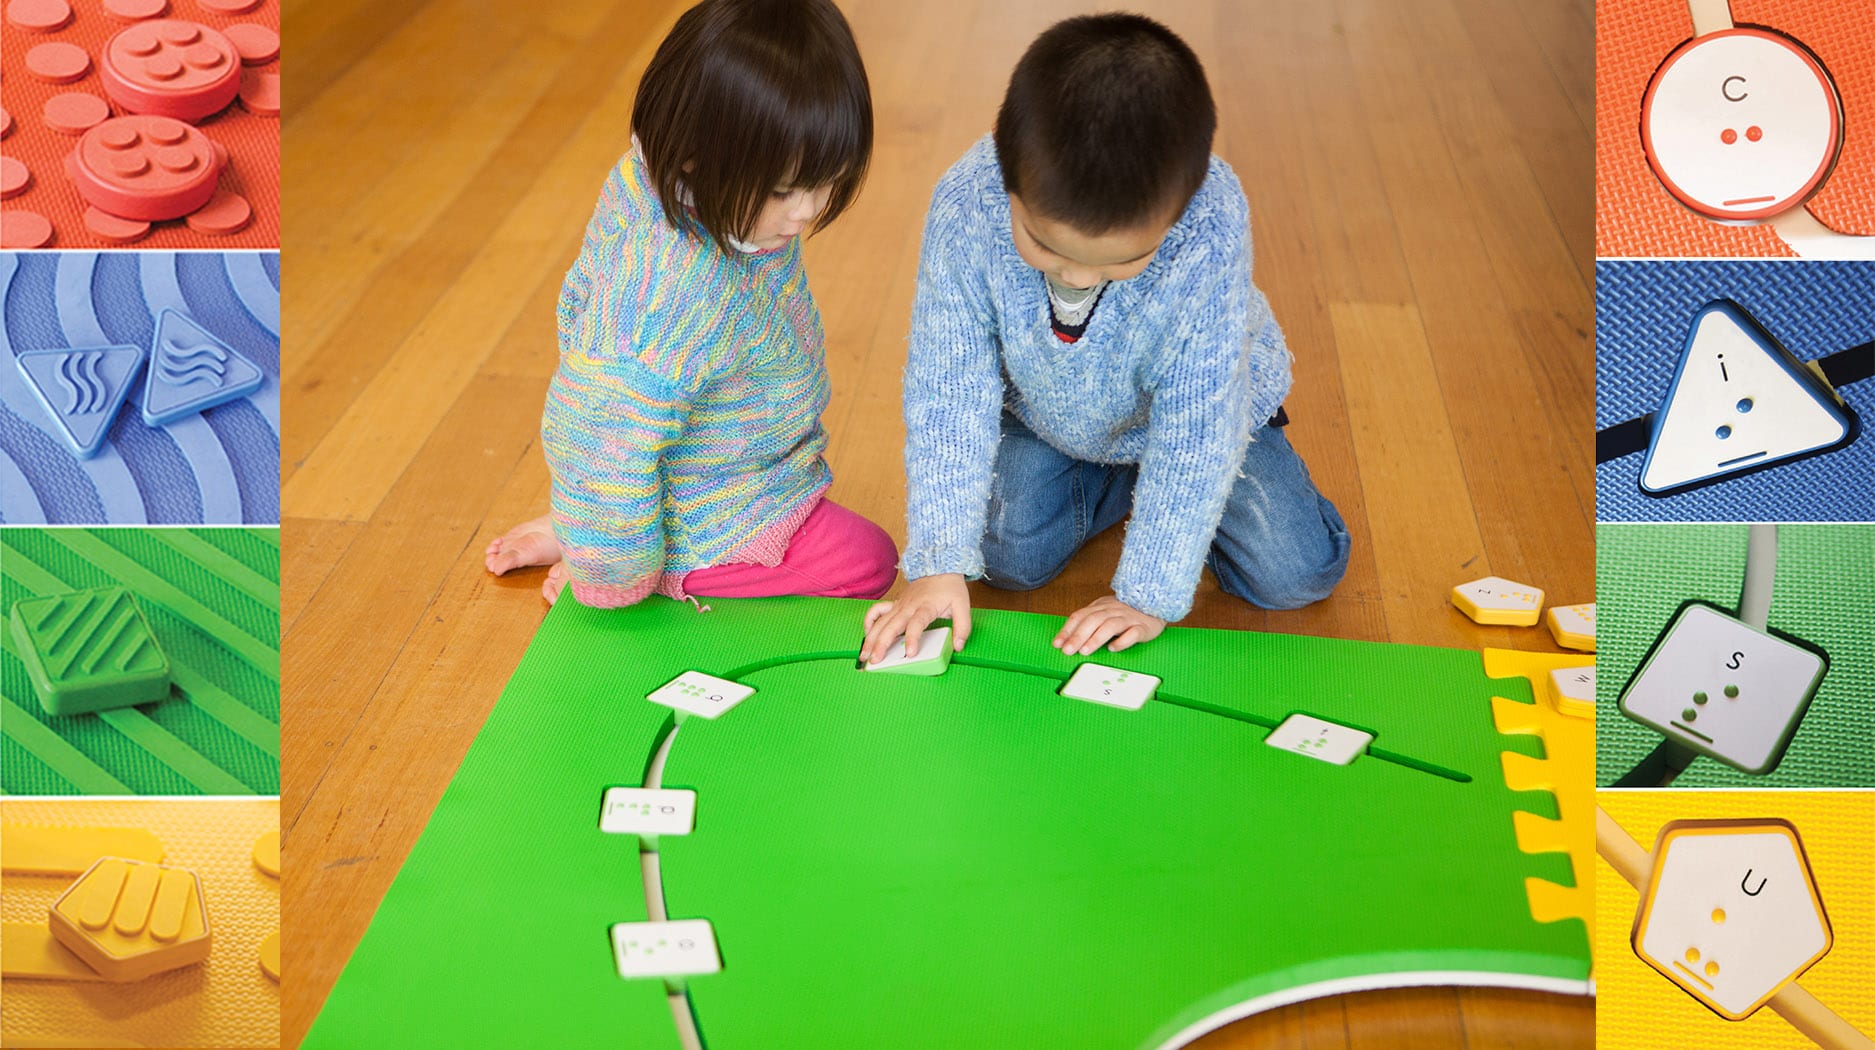 Photo shows two young children place square tiles in the cutouts of the green mat. Along the side vertically are images of red, blue, green, and yellow mats with matching tiles.